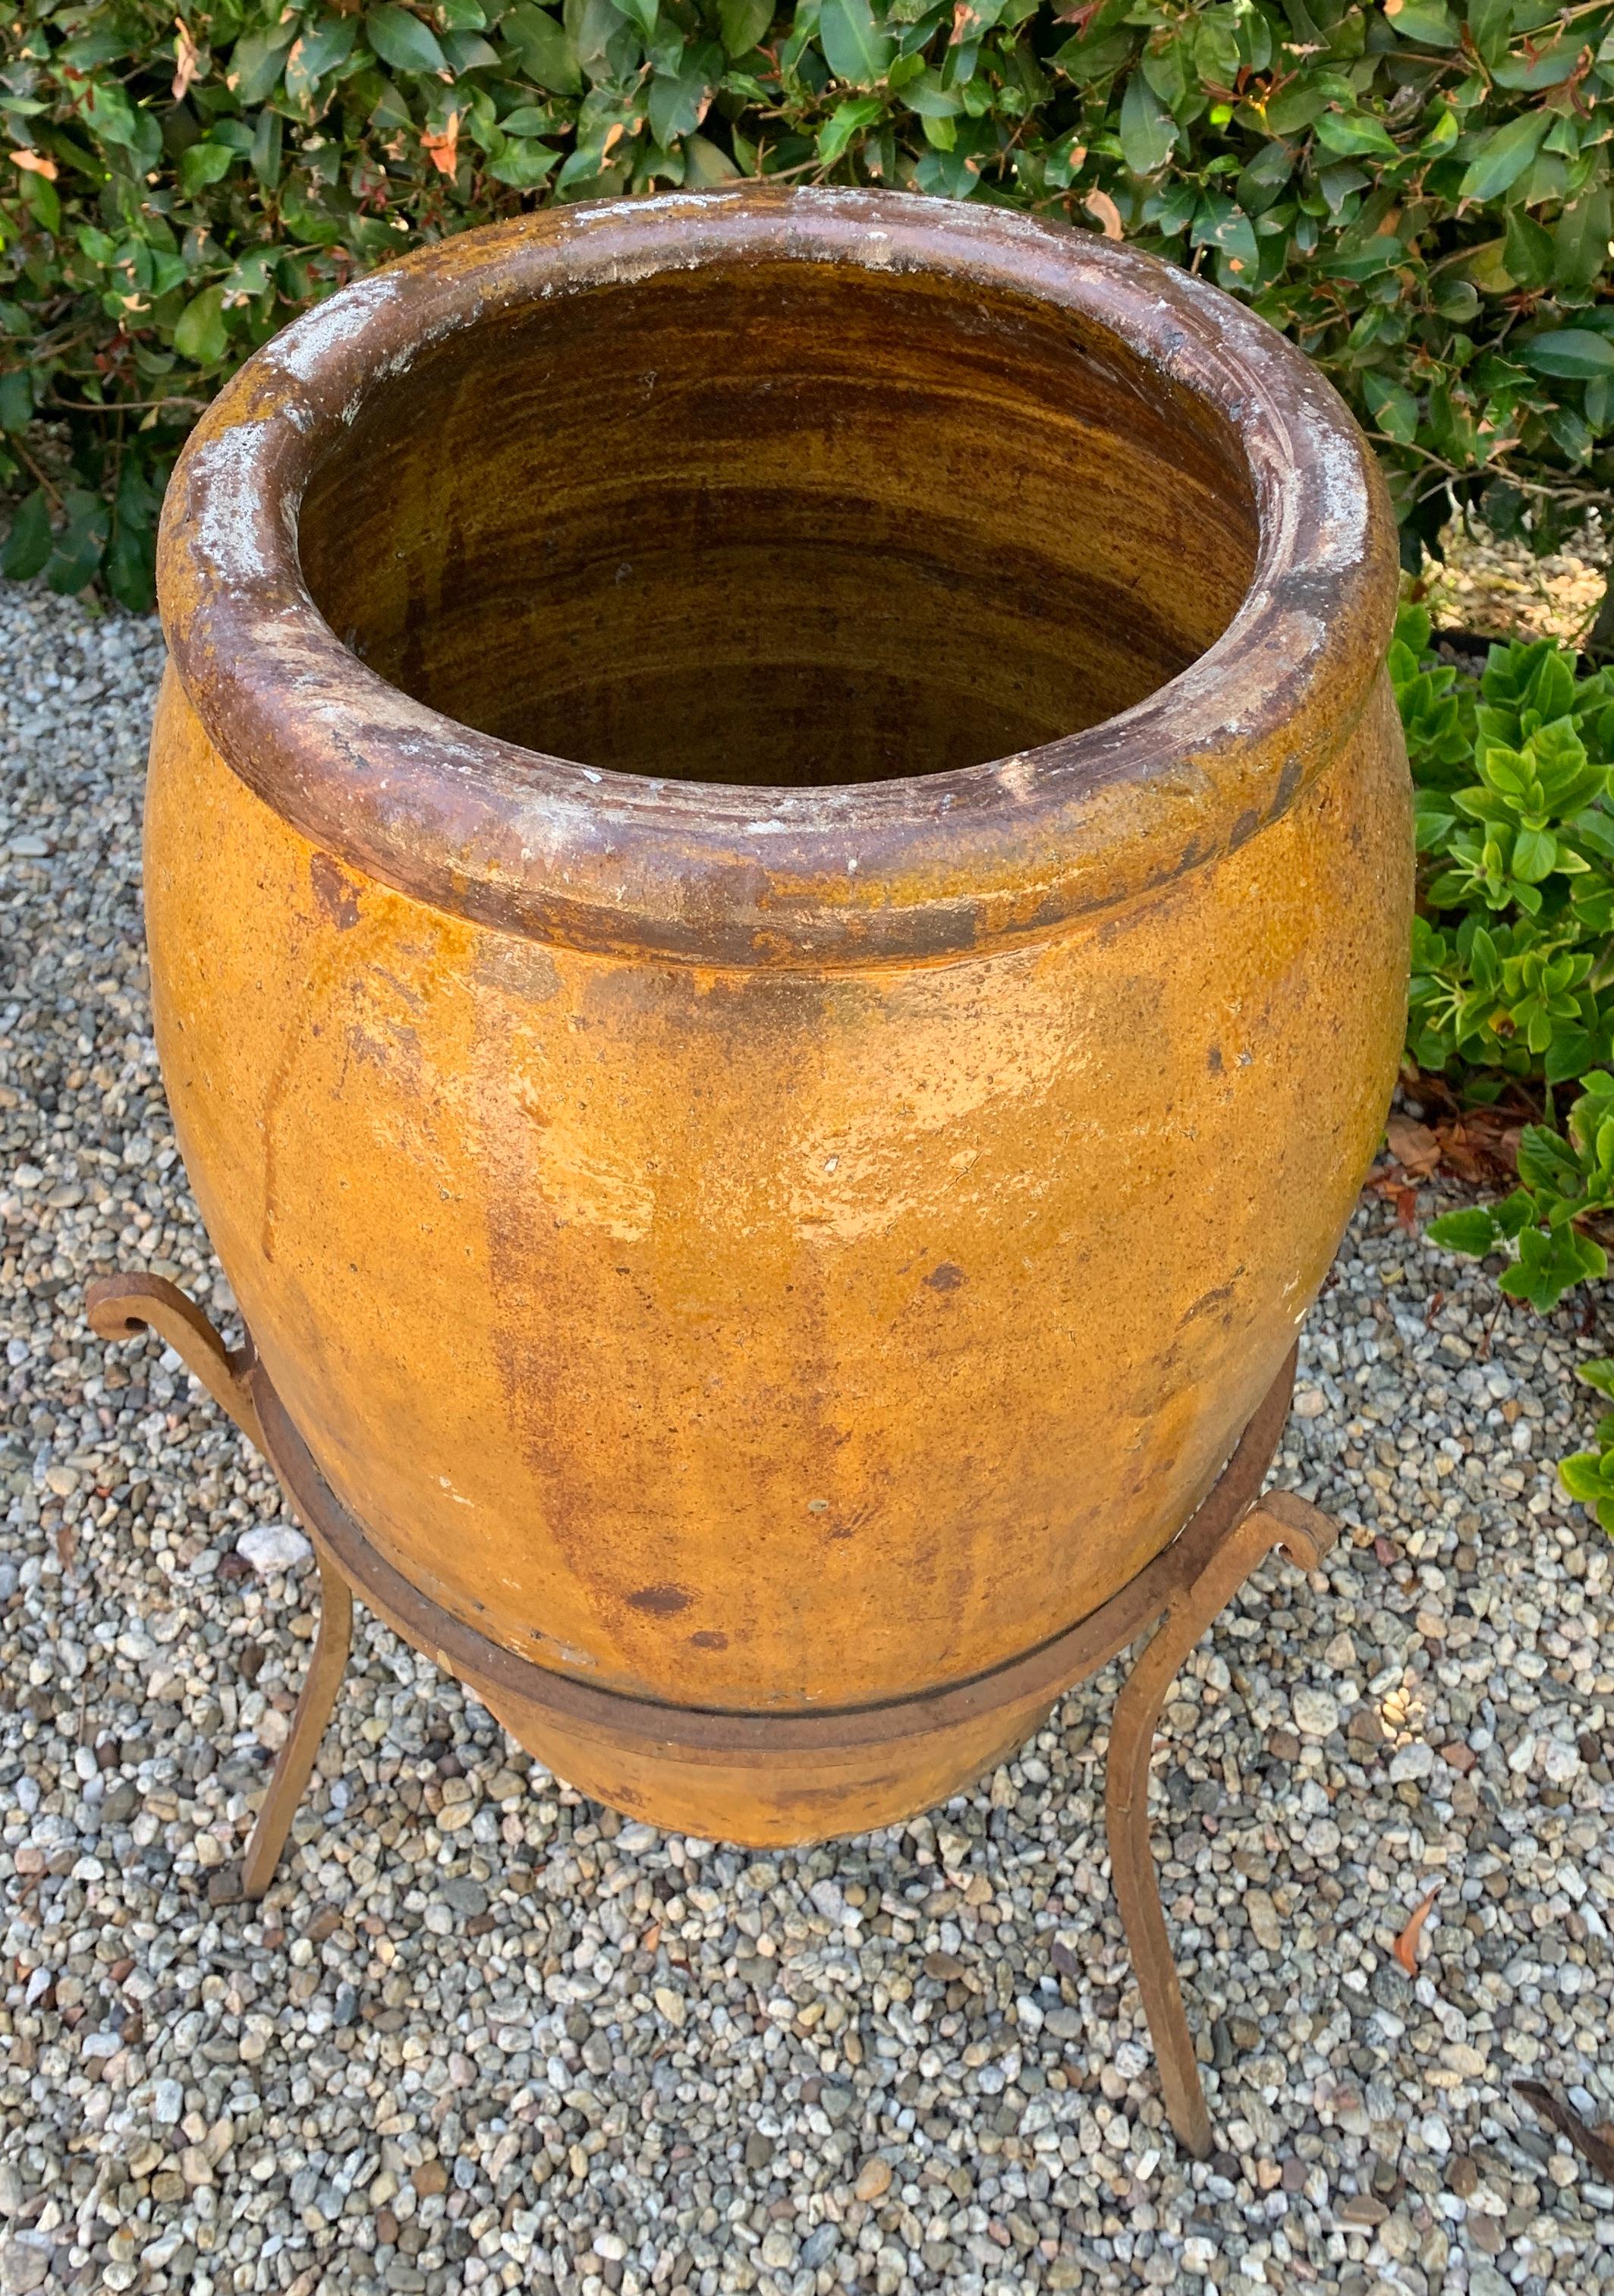 Glazed Terracotta Garden Planter in Iron Frame In Good Condition For Sale In Los Angeles, CA